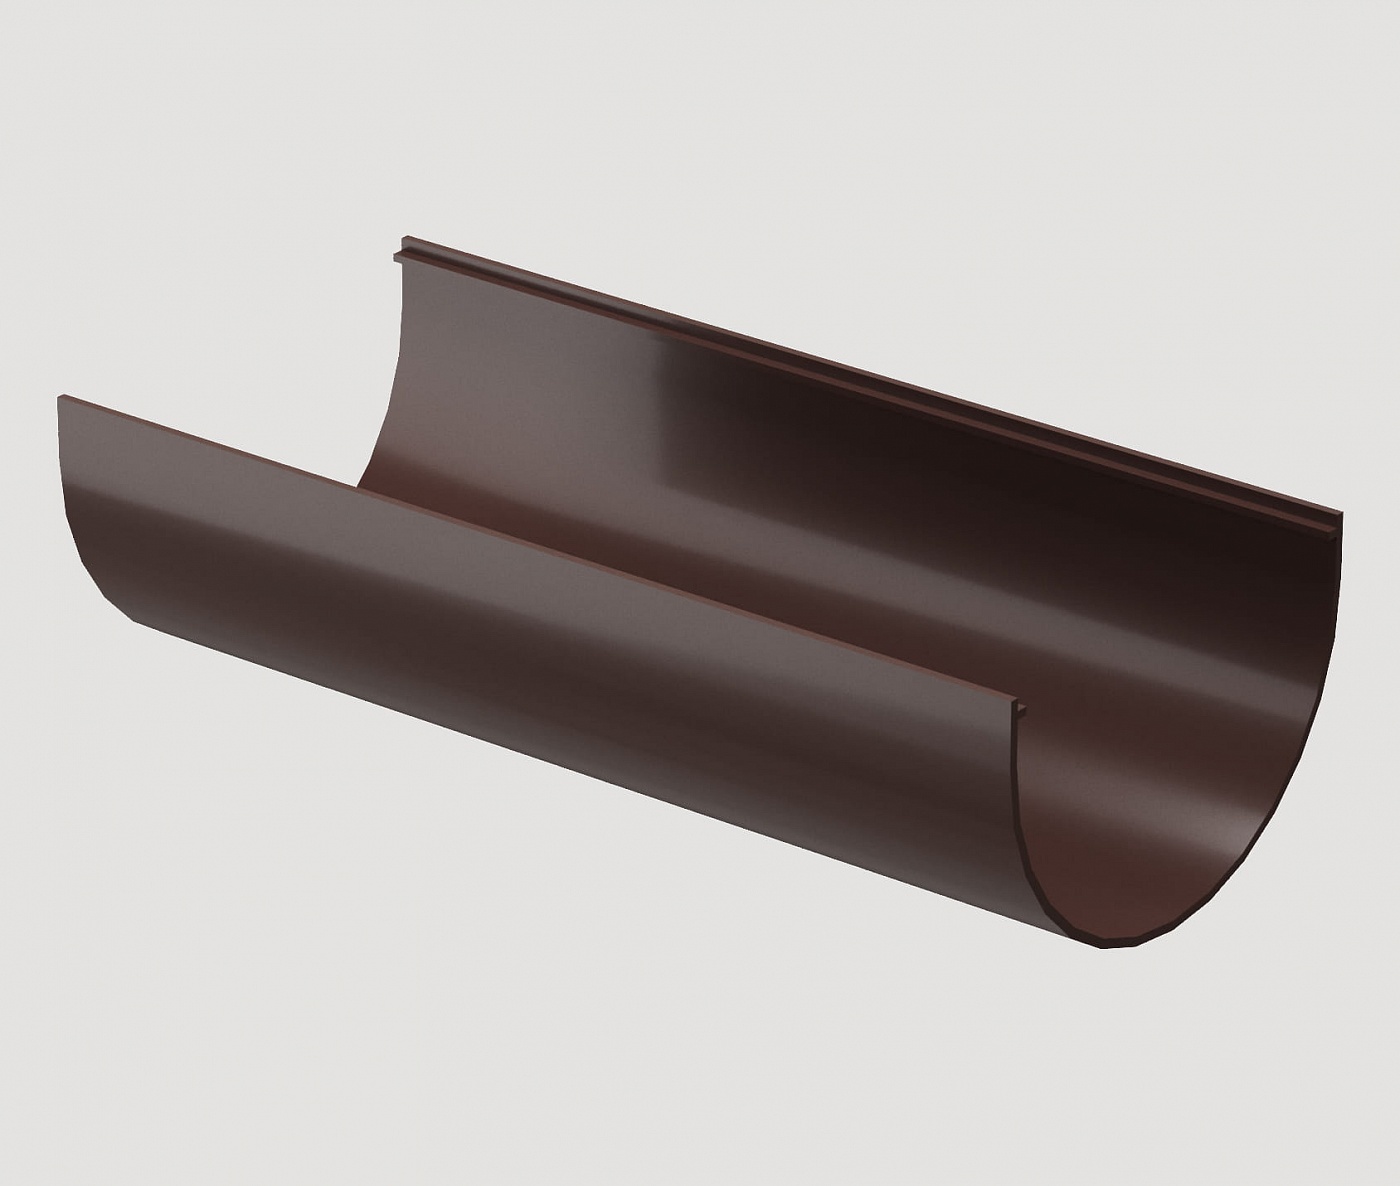 Водостоки - STANDARD SERIES Dark brown RAL 8017 - Elements of the drainage system - Gutter 3m